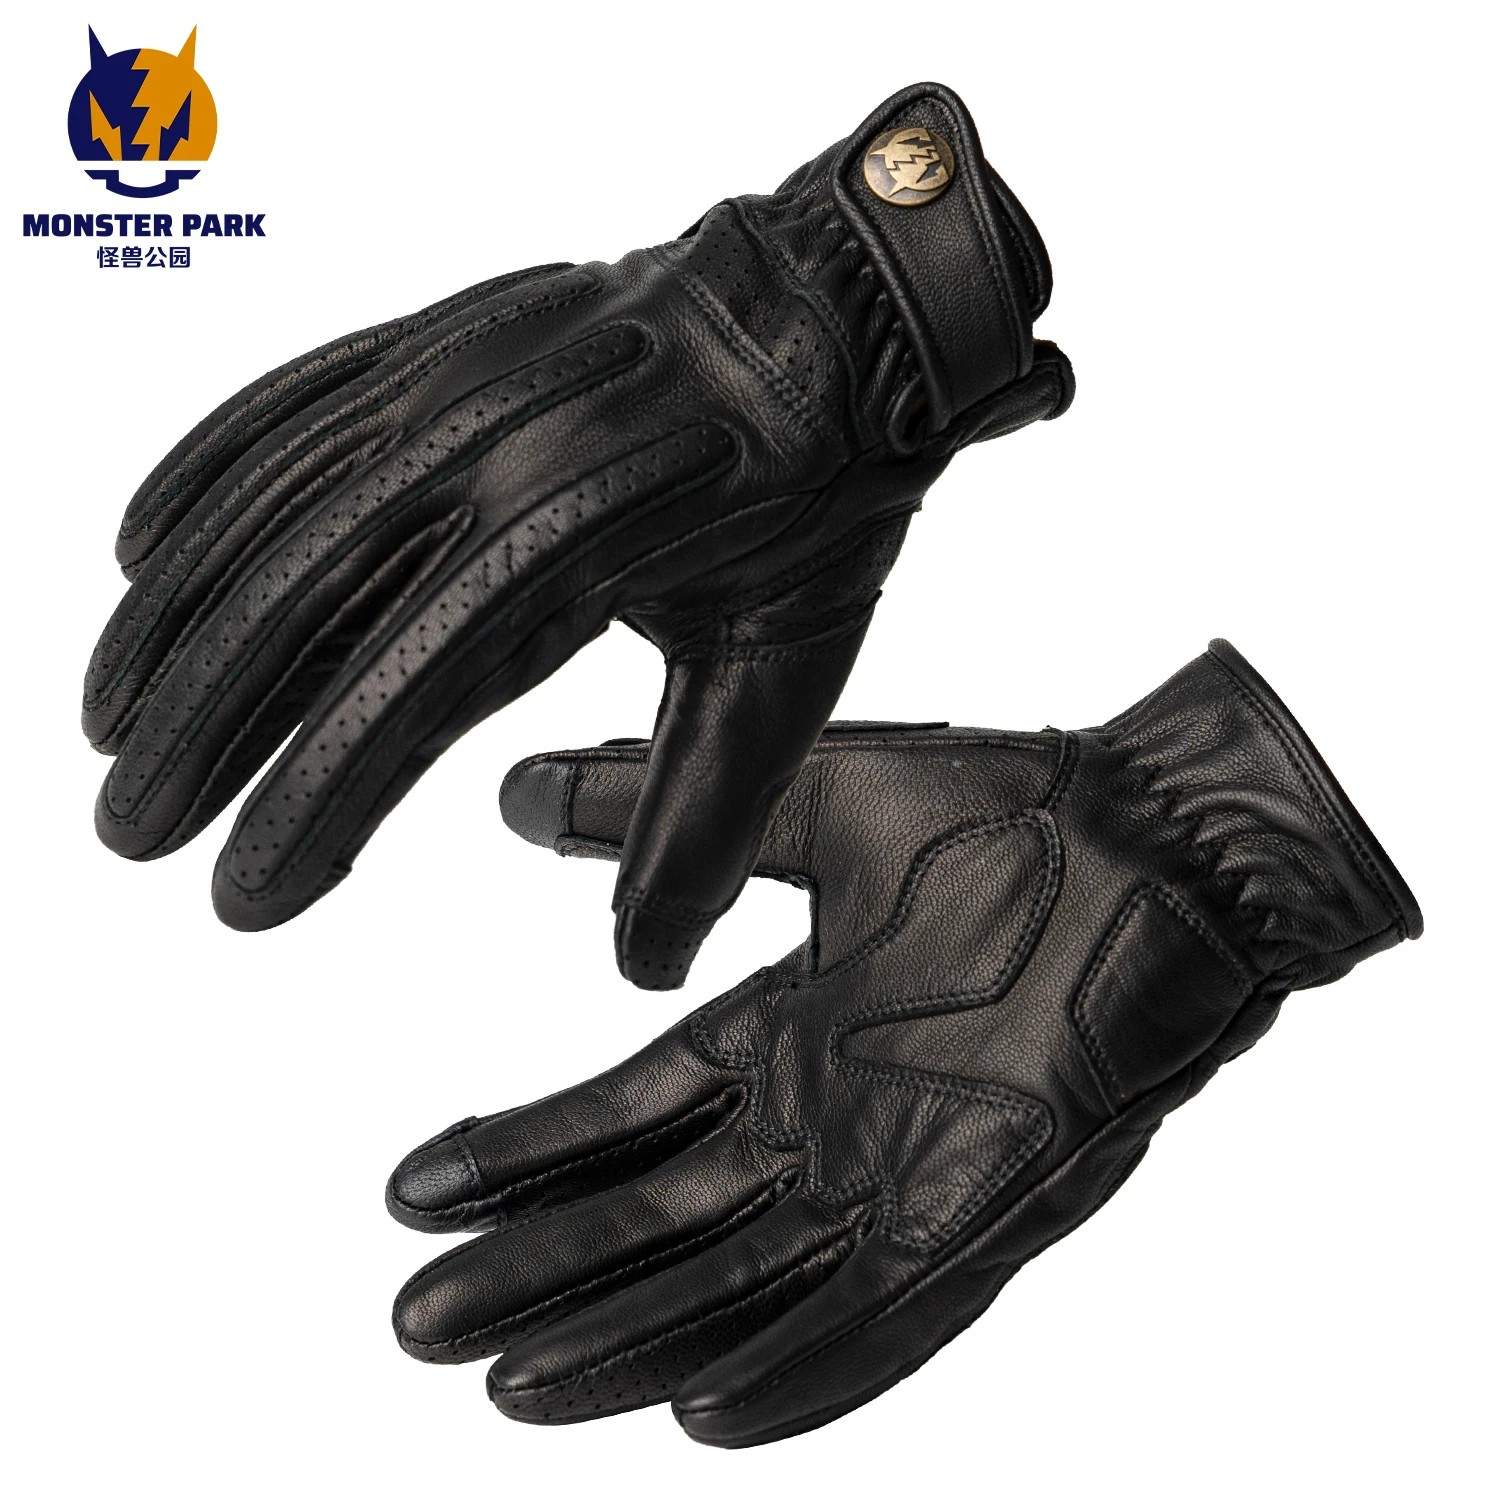 

MONSTER PARK Retro Motorcycle Gloves Genuine Leather Summer Breathable Goatskin Touch Screen Motocross Guantes Moto Riding Glove